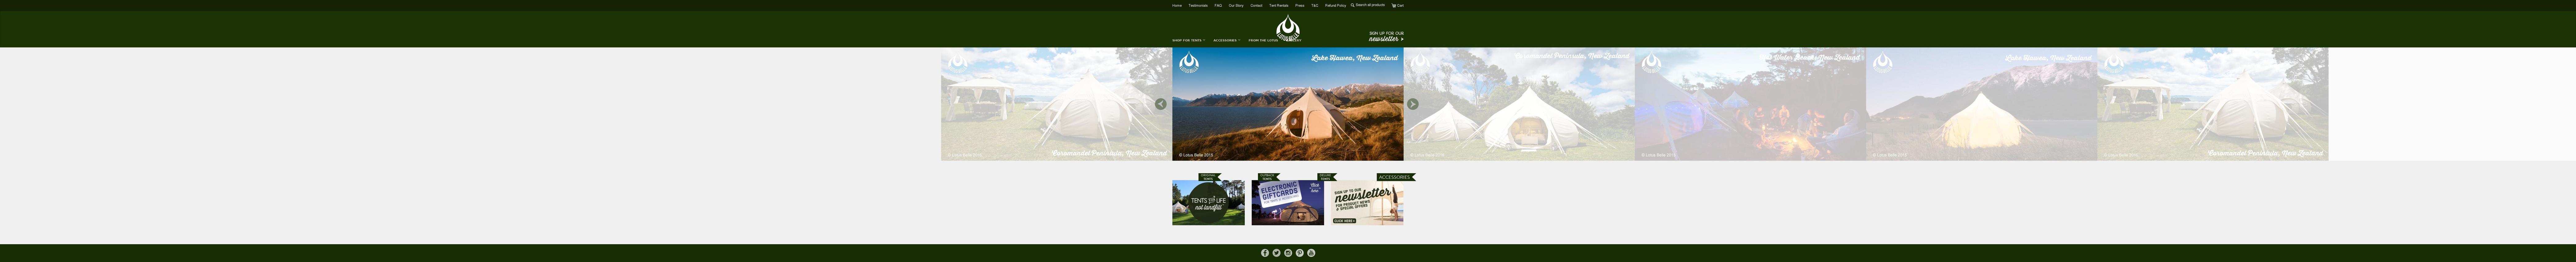 belle Shopify theme site example belltents.co.nz